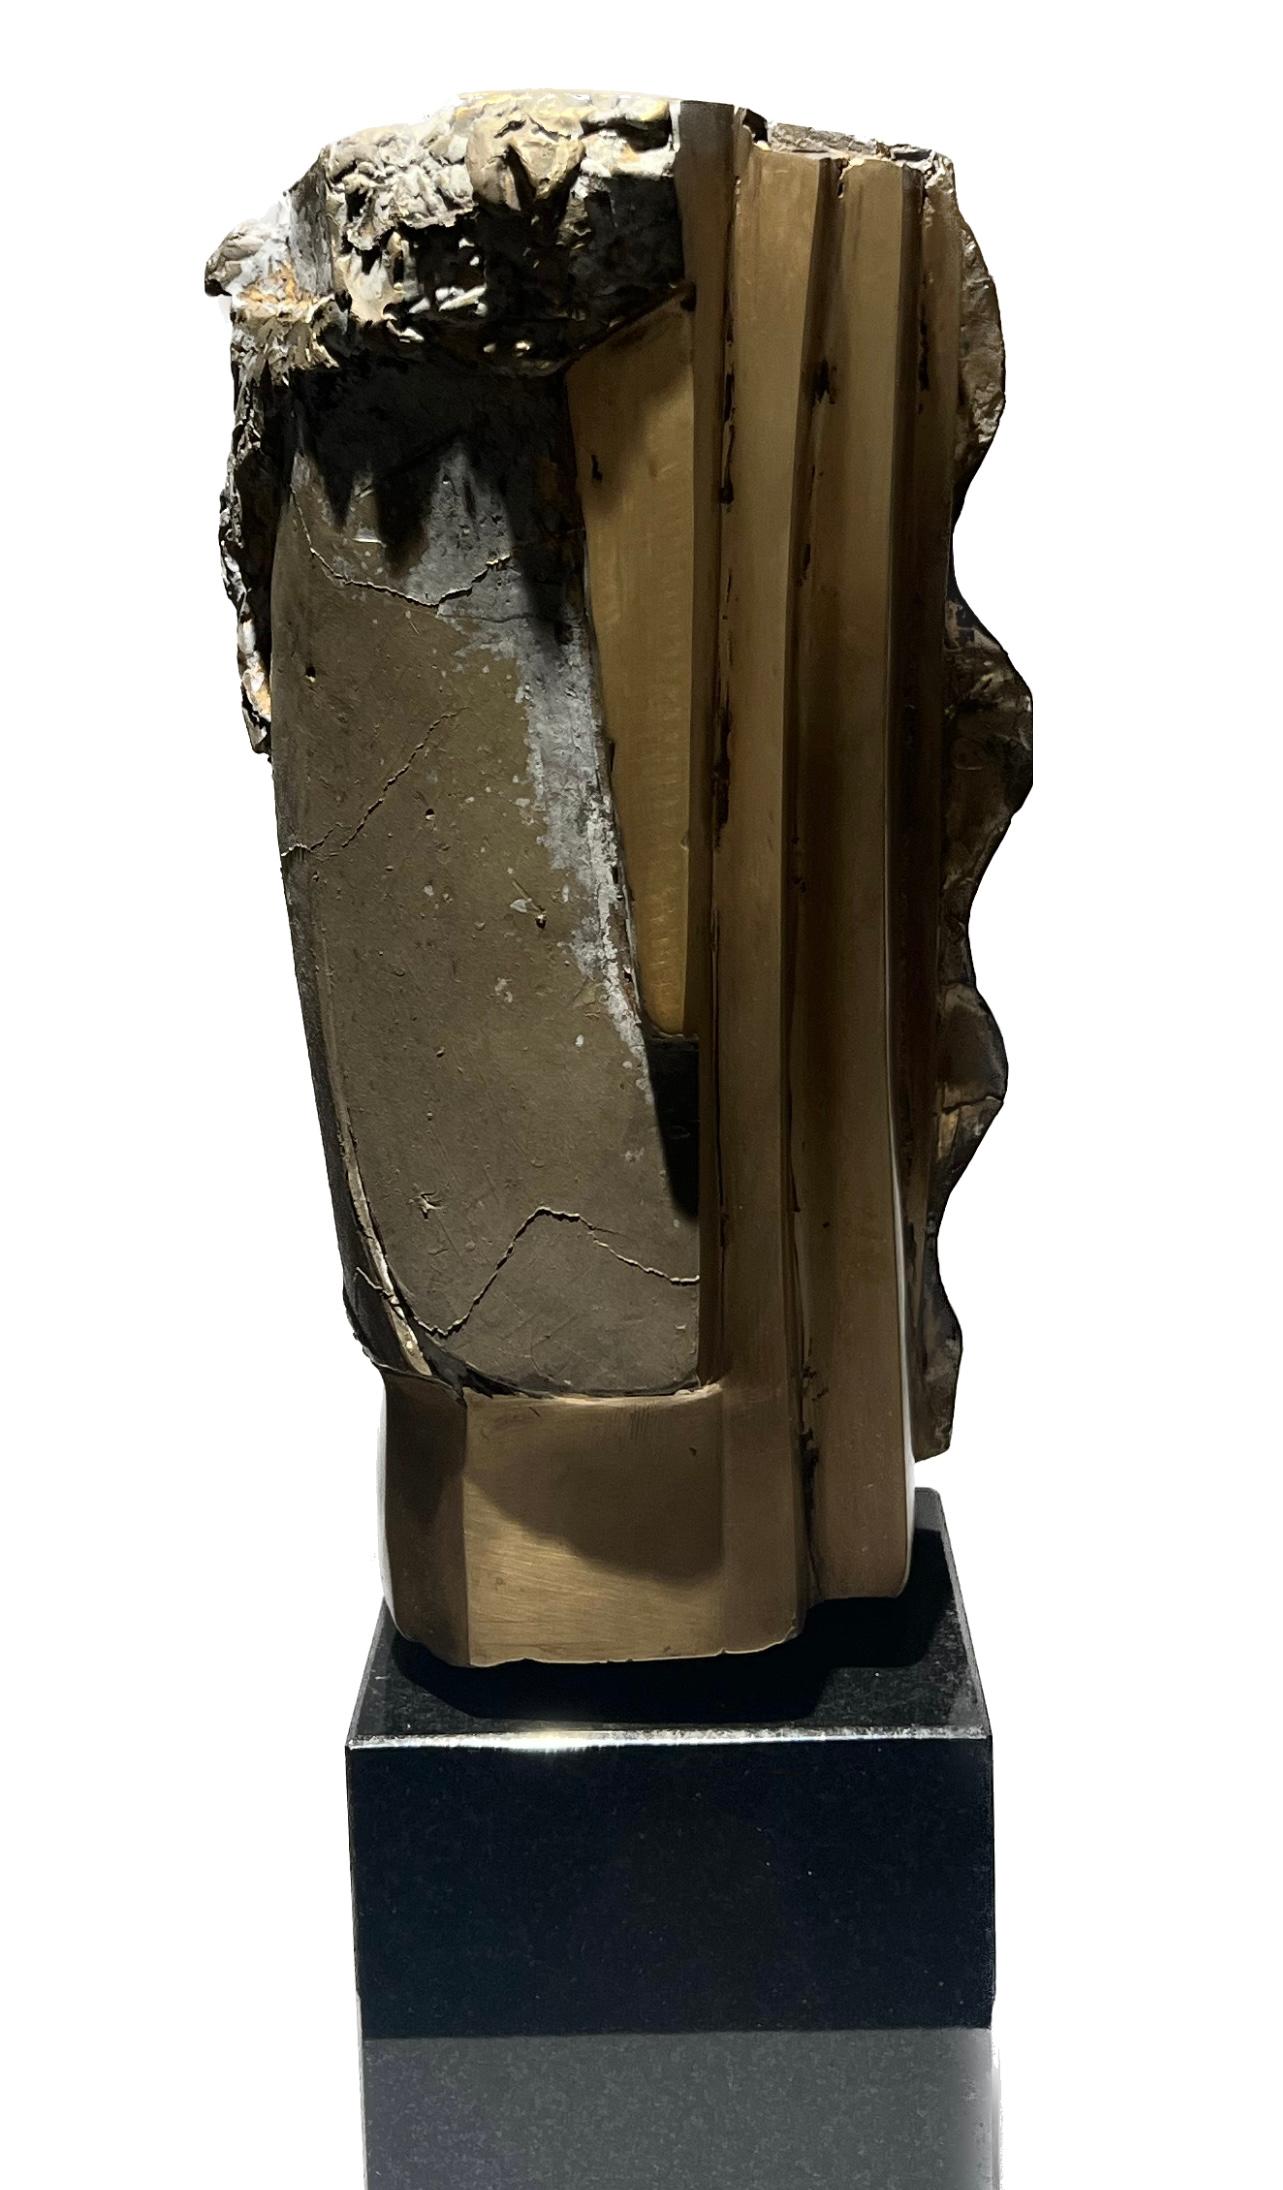 Thomas Junghans Figurative Sculpture - Little Abstract Head no. 10 Bronze Sculpture Polished Limited Edition